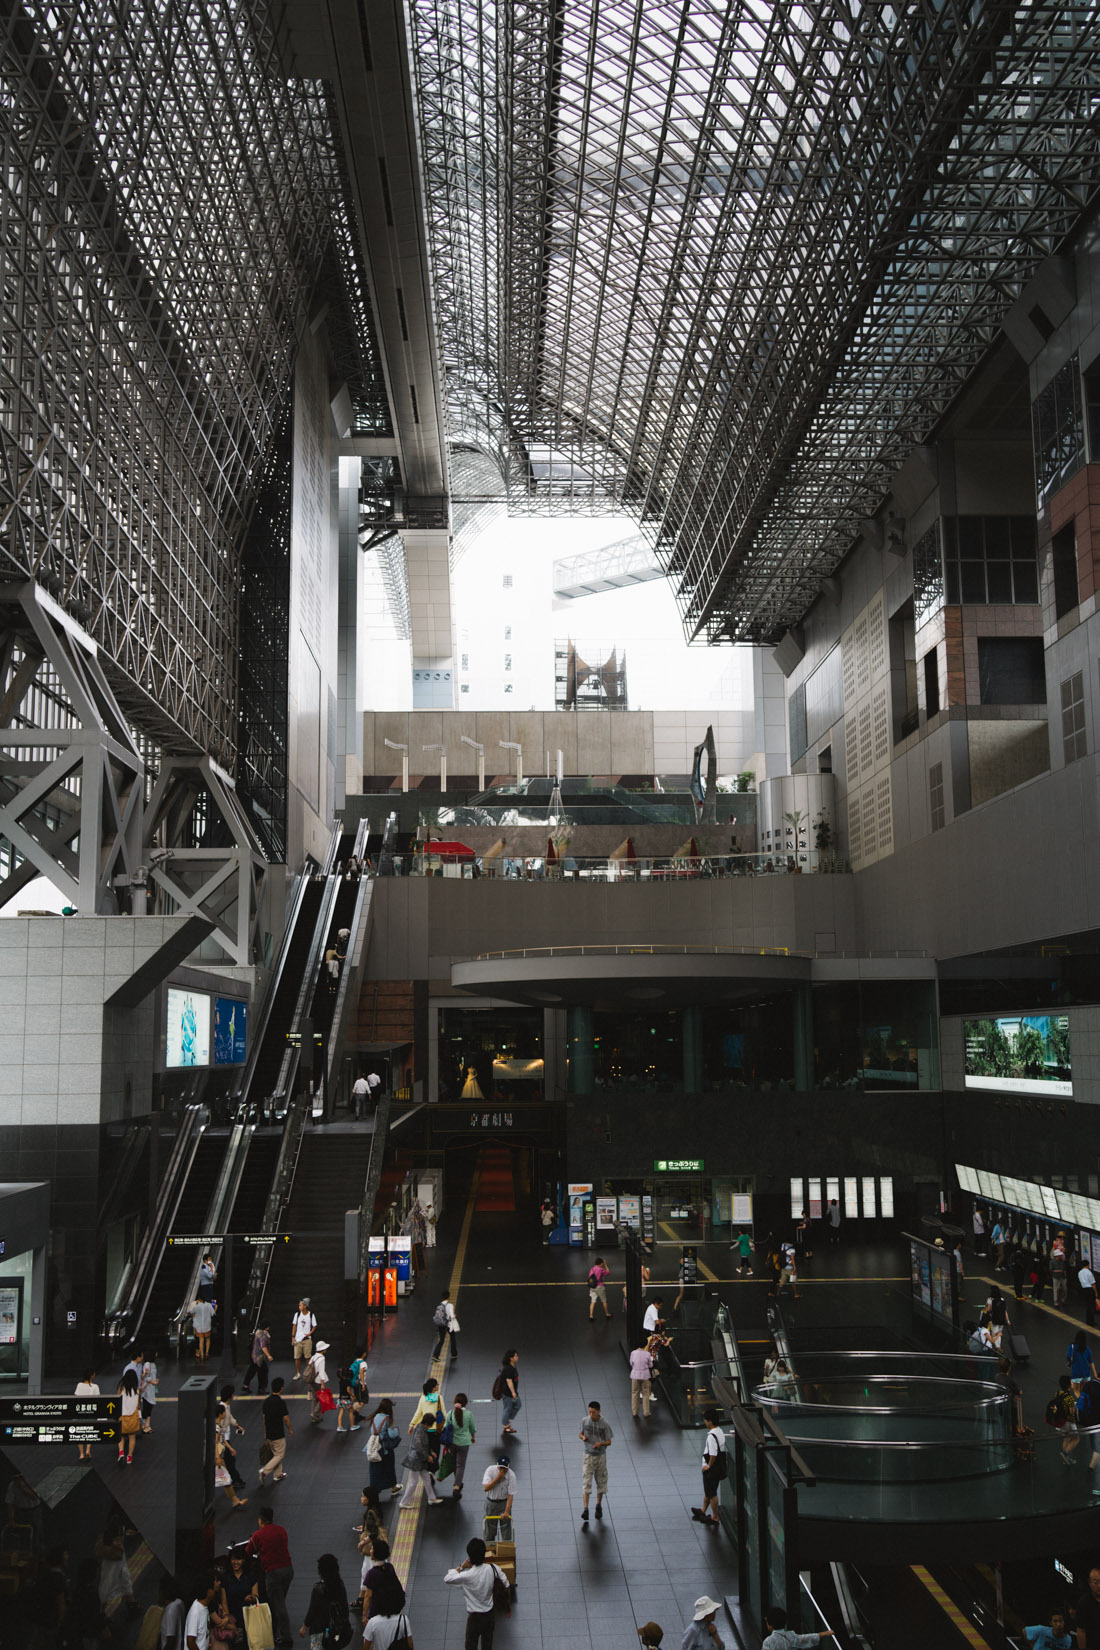 Saying the Kyoto station is huge is, quite frankly, an understatement.